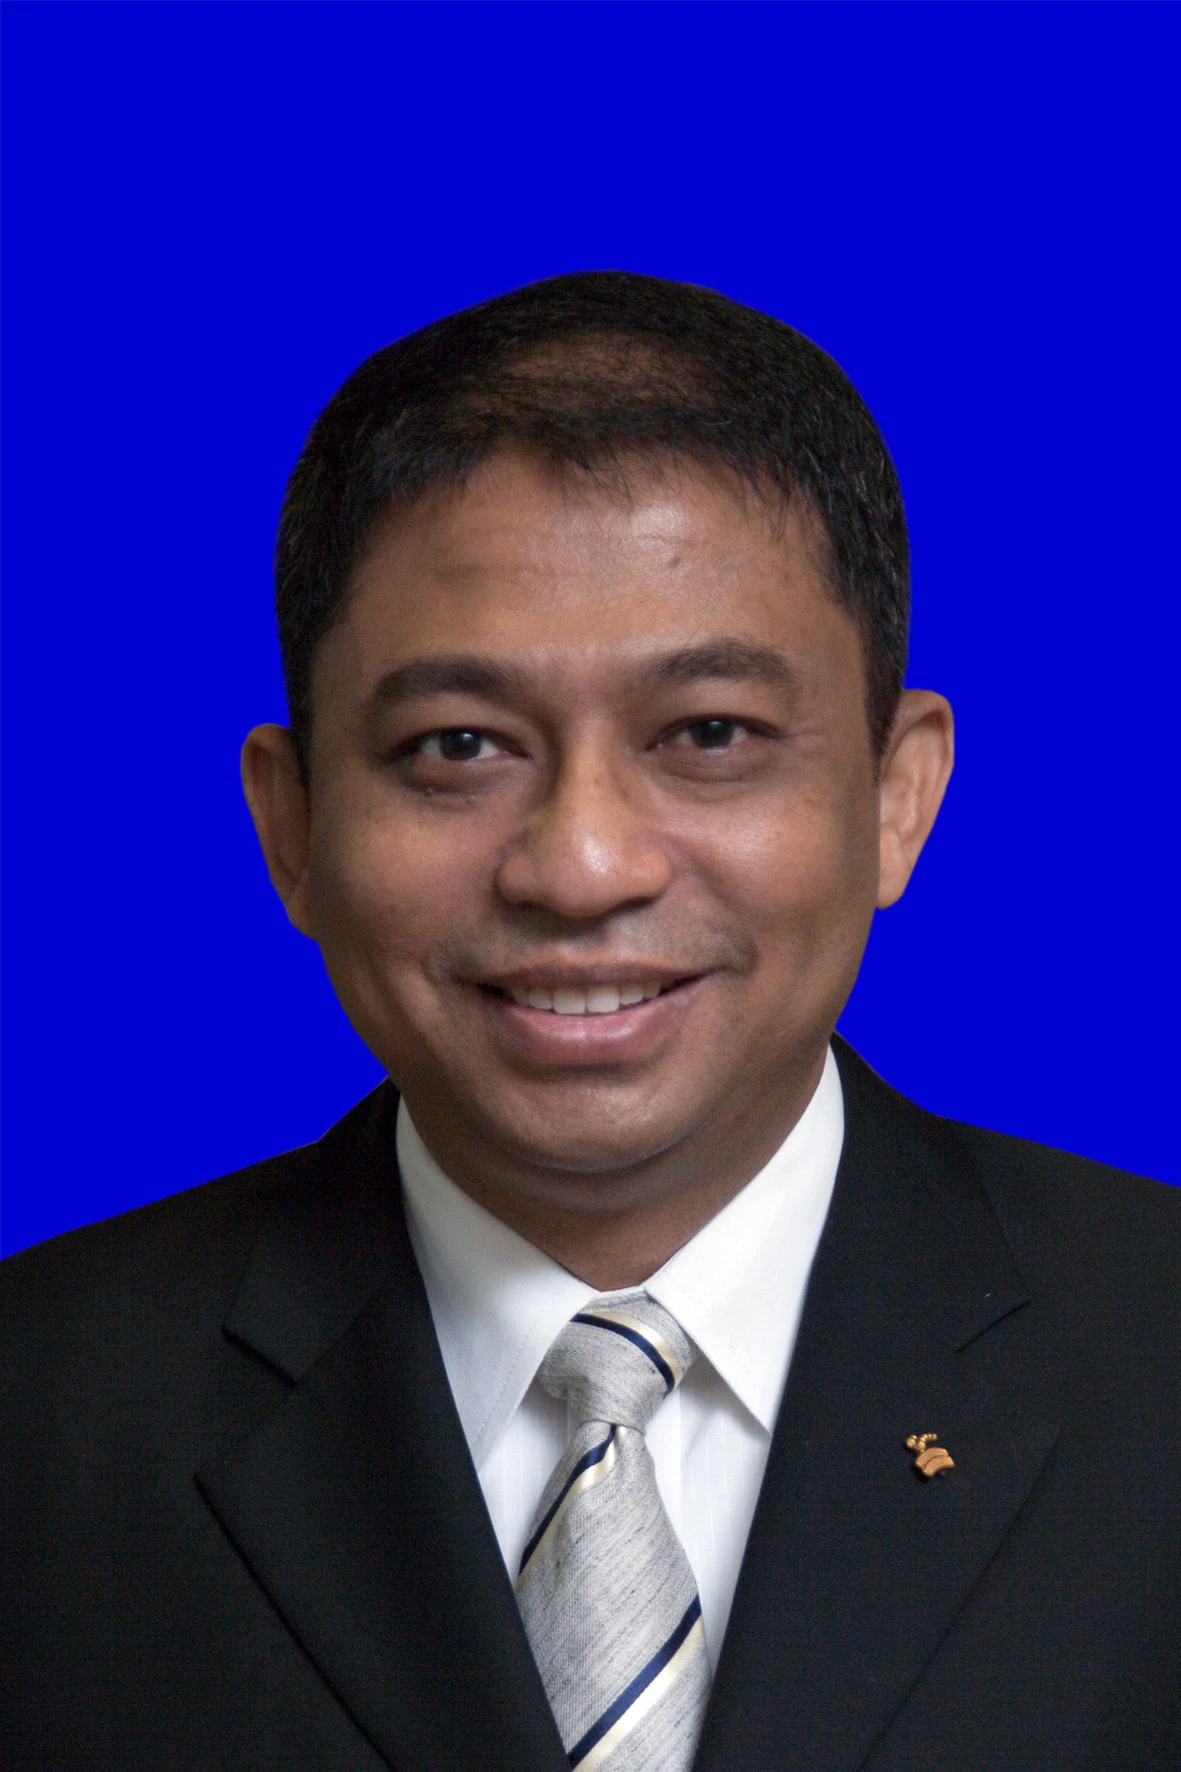 Mohamad Ikhsan is the special advisor to the Vice President of the Republic of Indonesia.